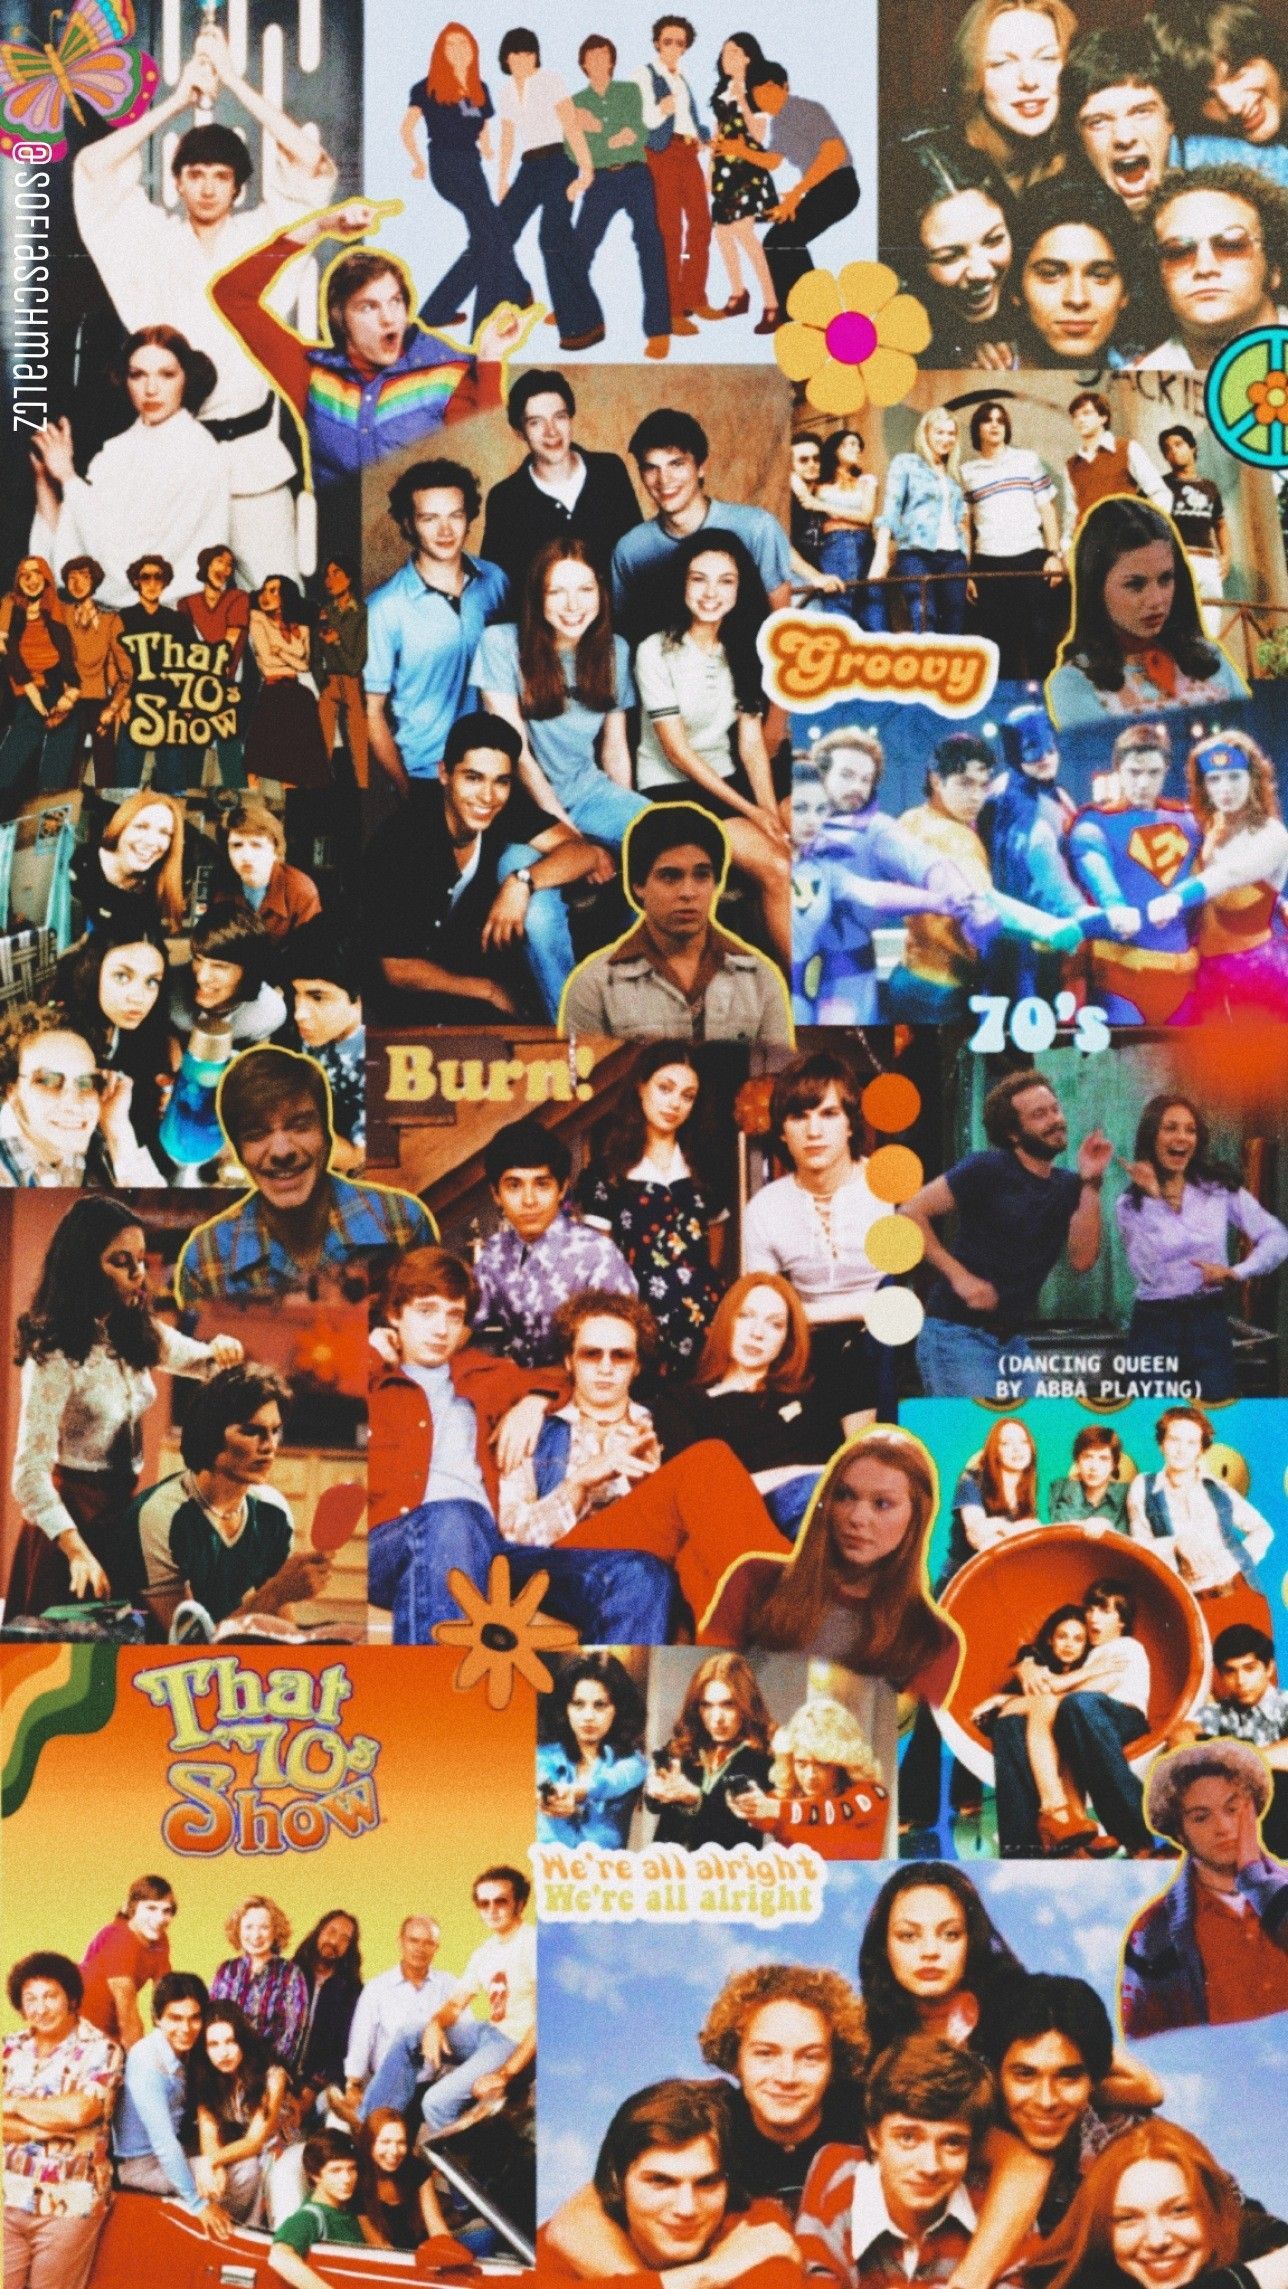 A collage of pictures from the show - 70s